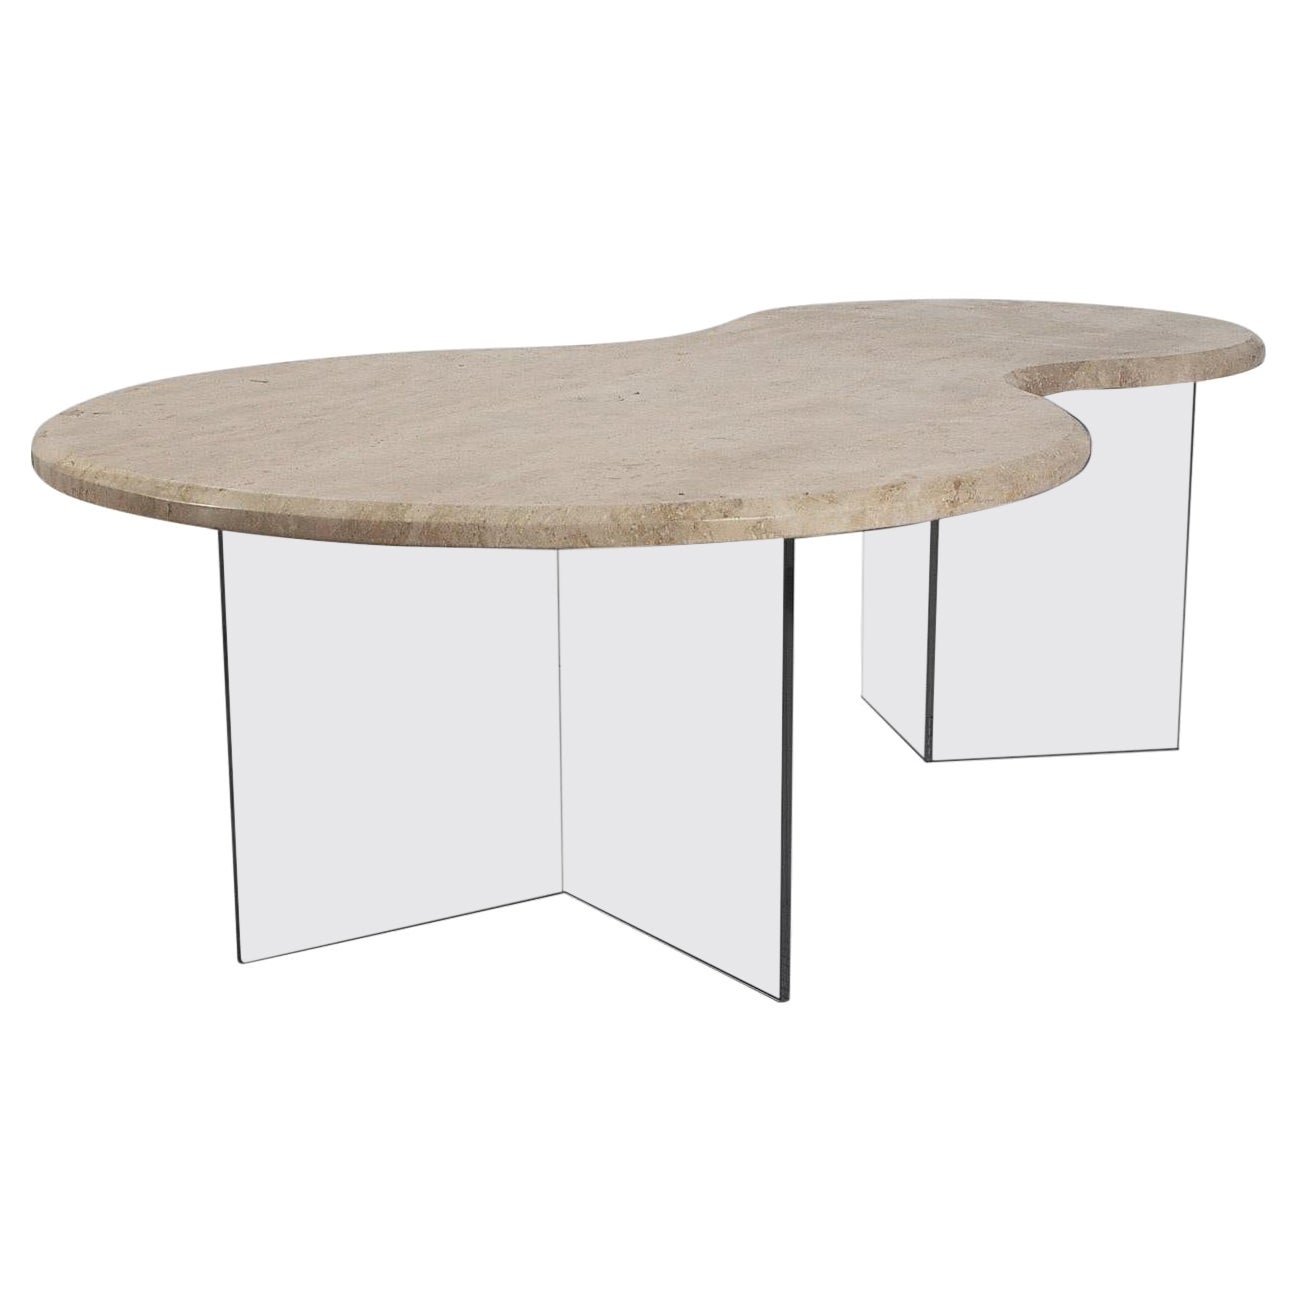 Mid Century Italian Modern Floating Travertine Marble Free Form Cocktail Table For Sale